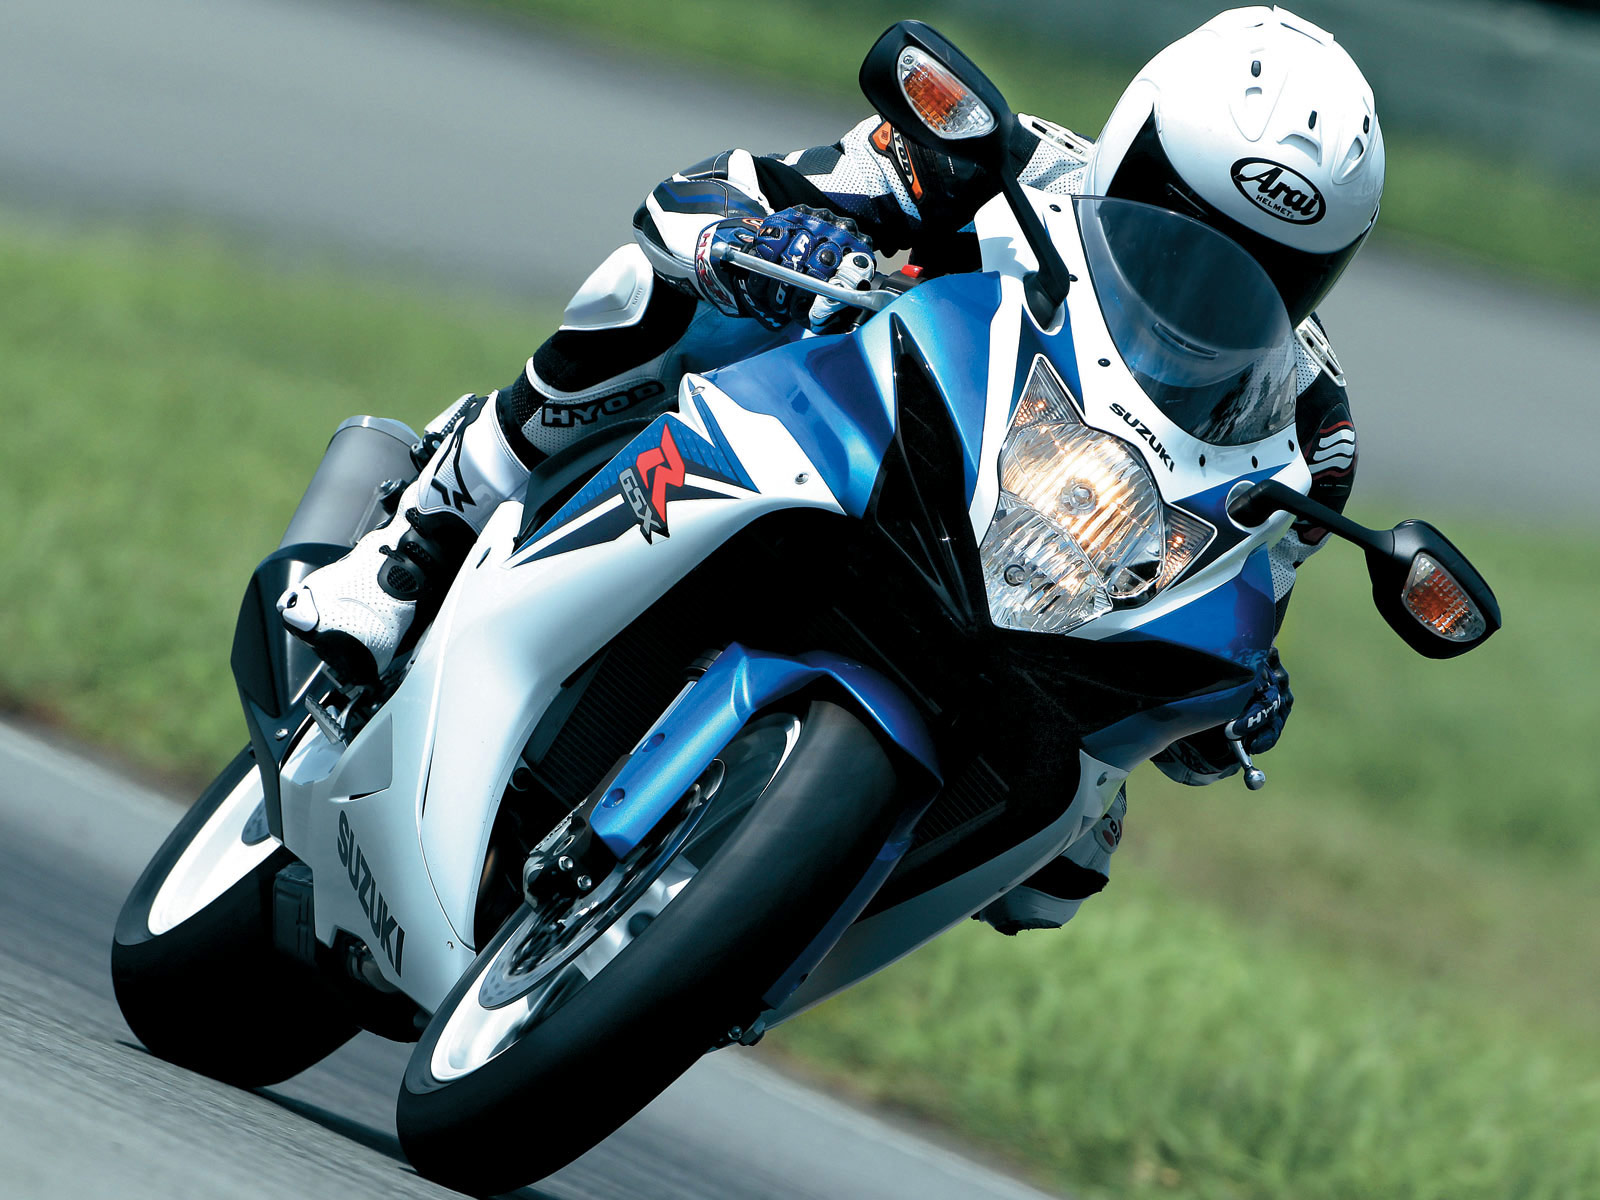 Motorcycle insurance quotes information, lawyers, gambar motor